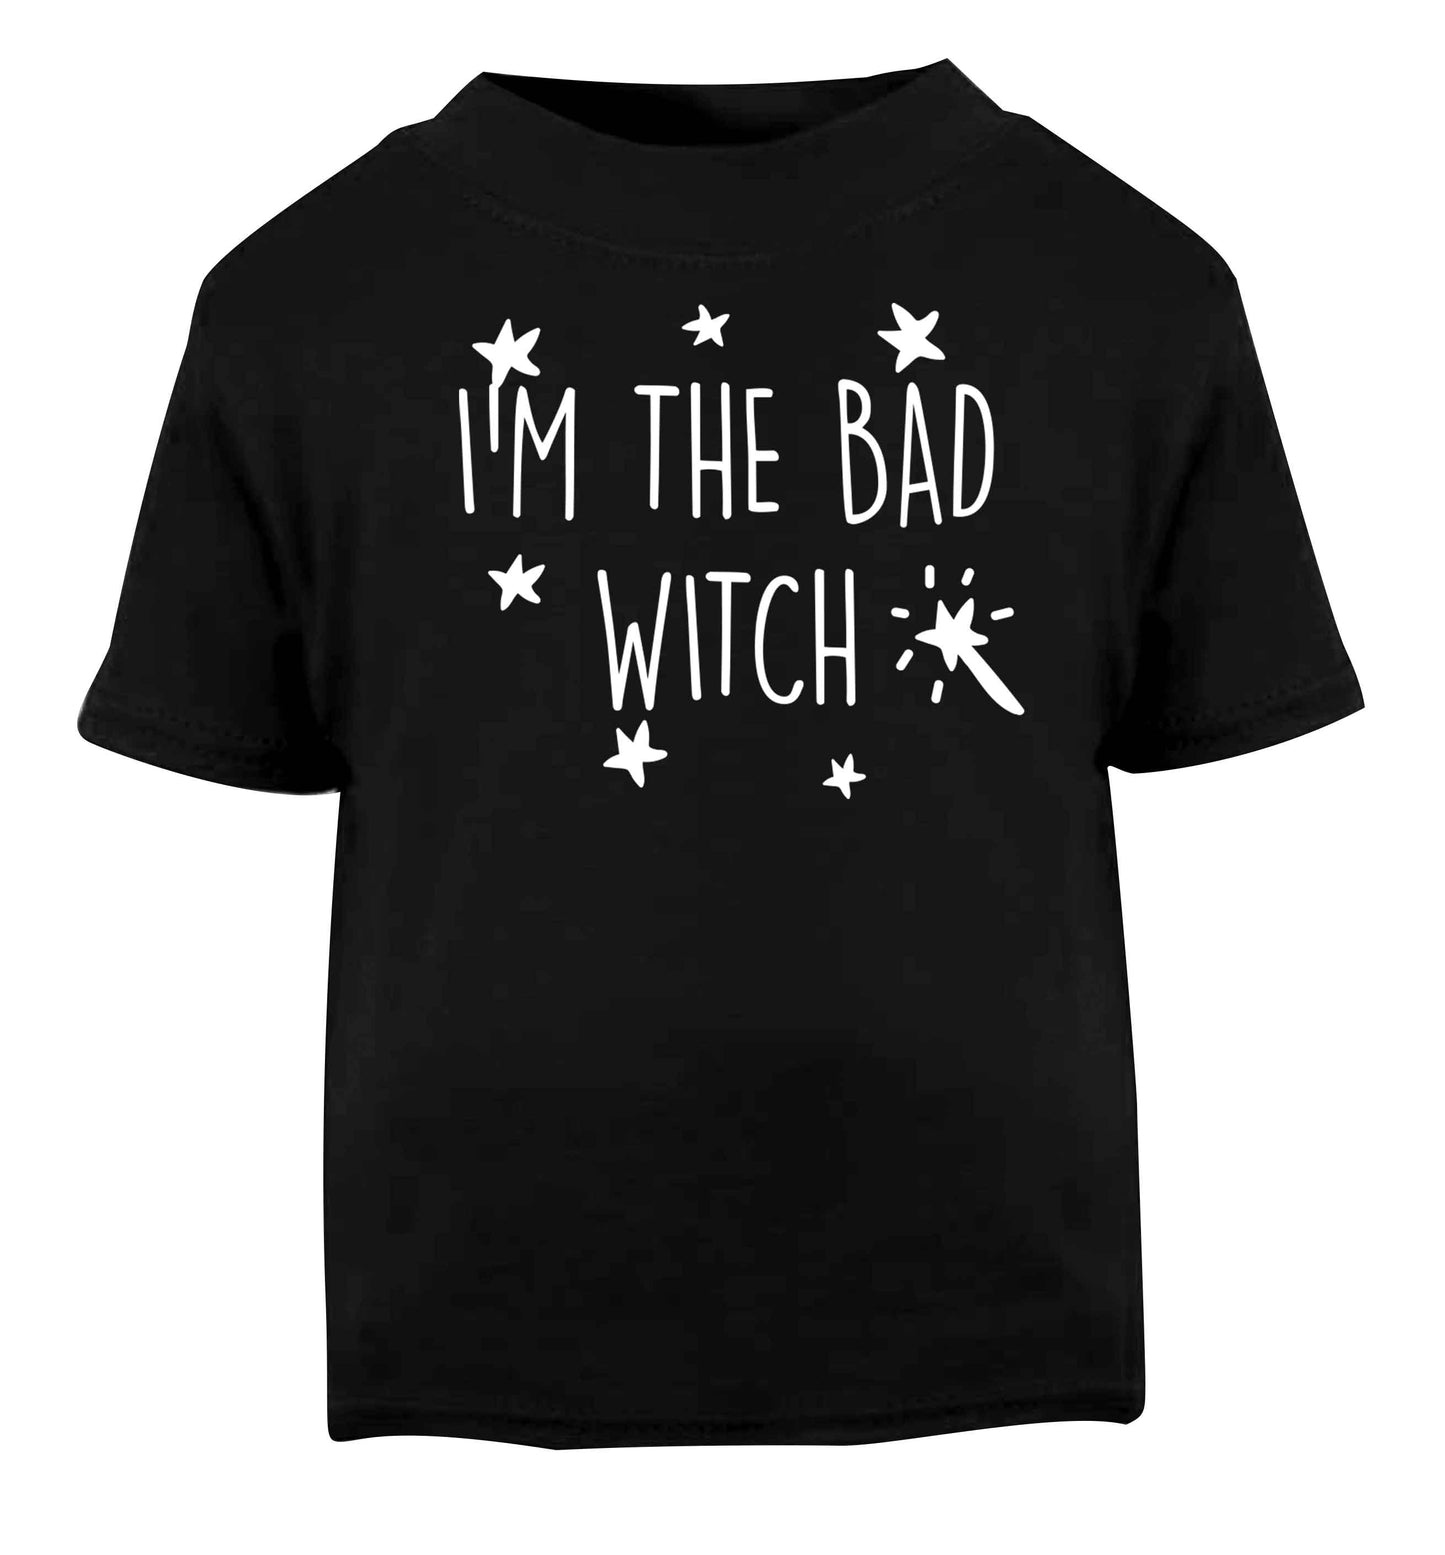 Bad witch Black baby toddler Tshirt 2 years